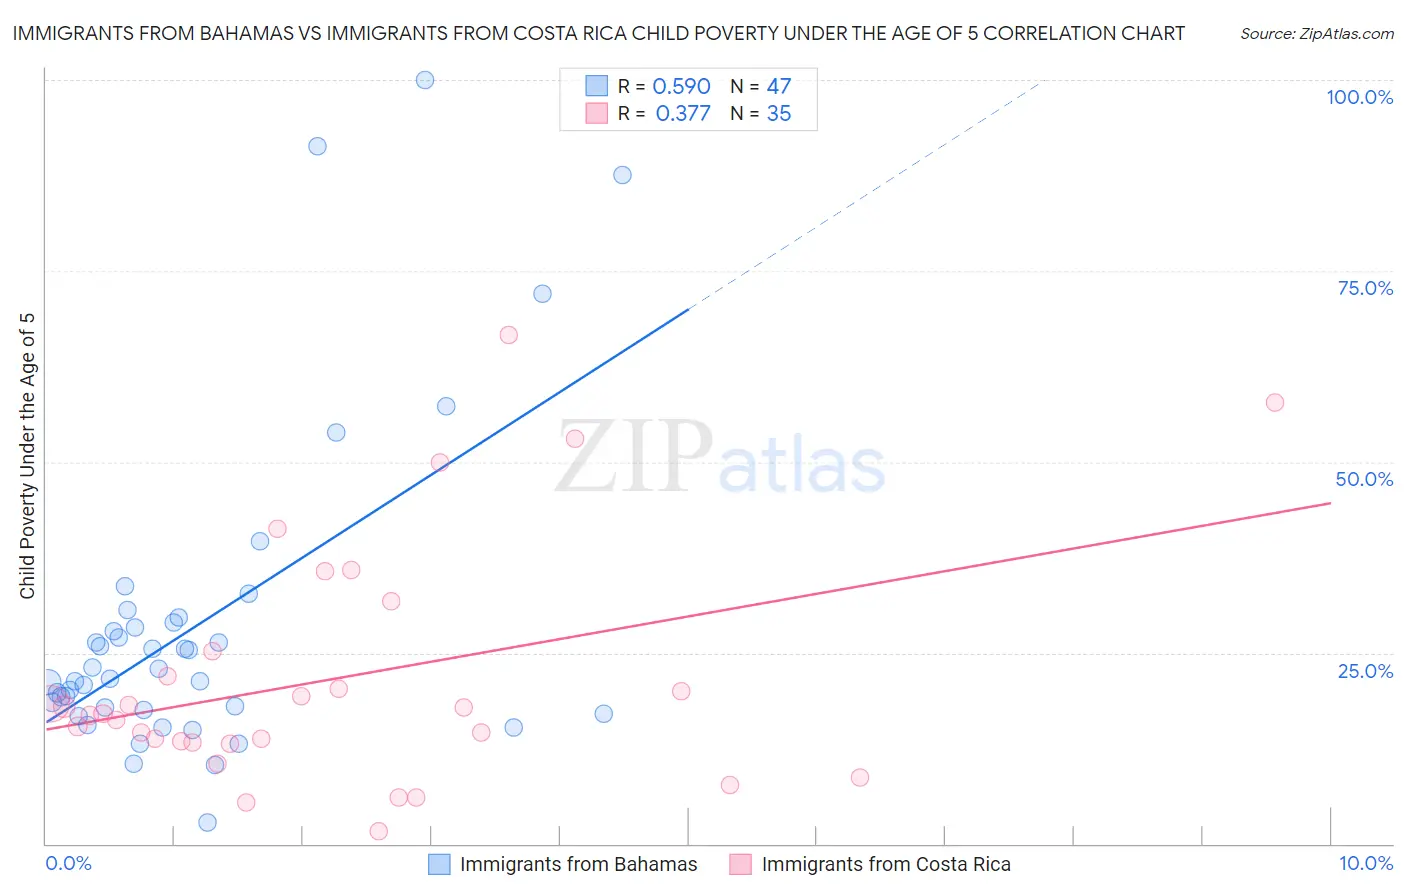 Immigrants from Bahamas vs Immigrants from Costa Rica Child Poverty Under the Age of 5